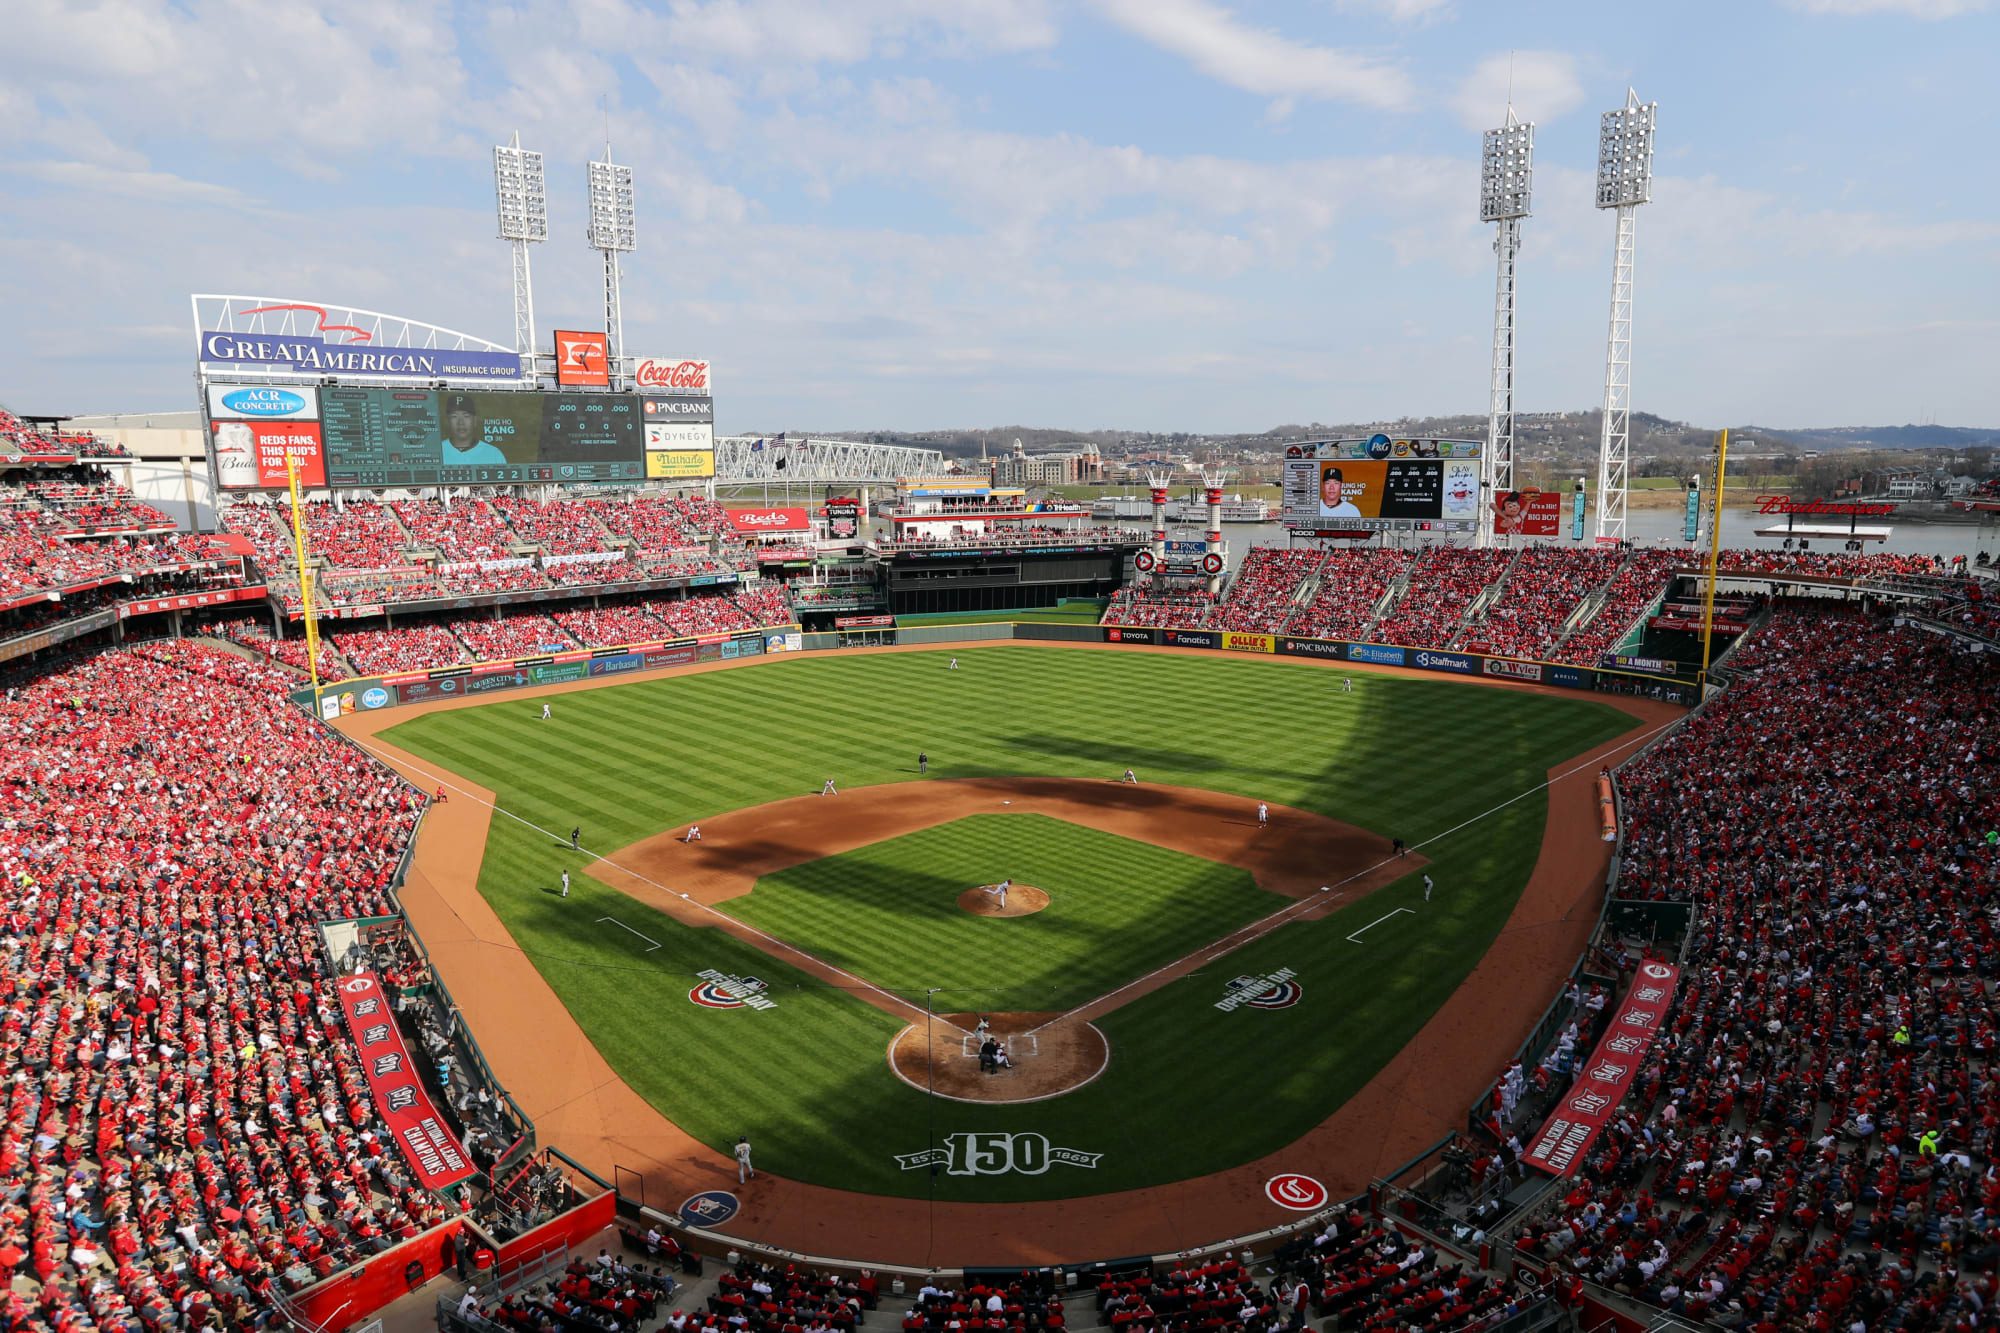 Cincinnati Reds early attendance numbers not a concern